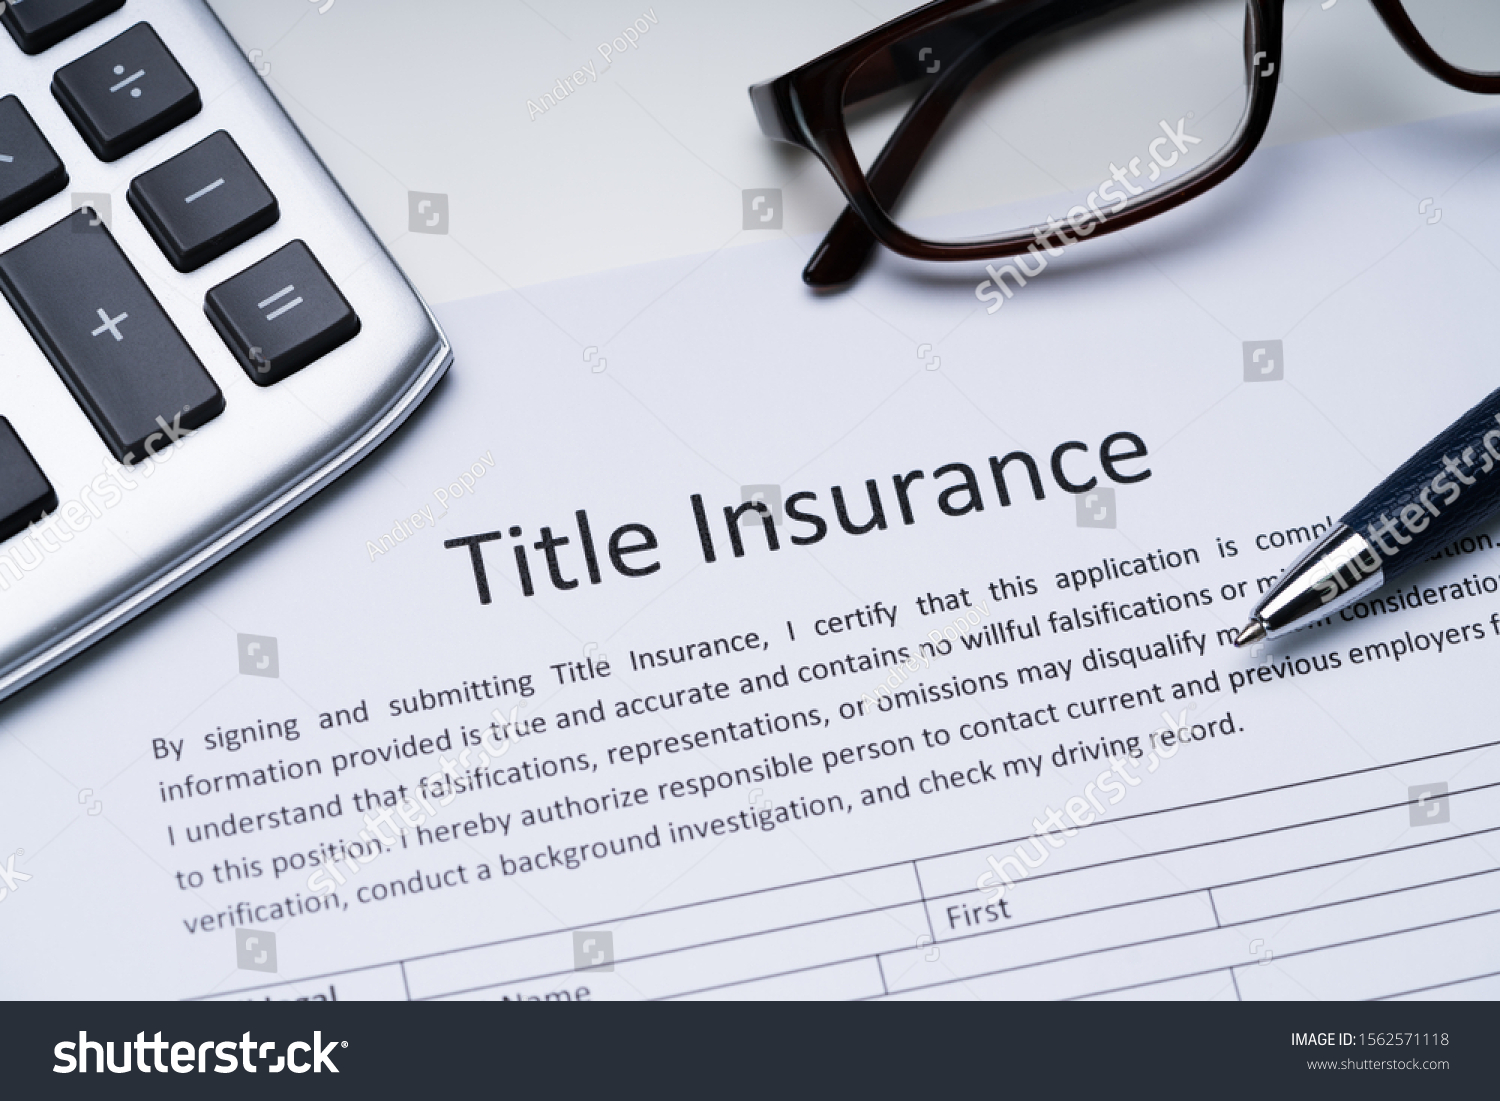 WHAT IS TITLE INSURANCE